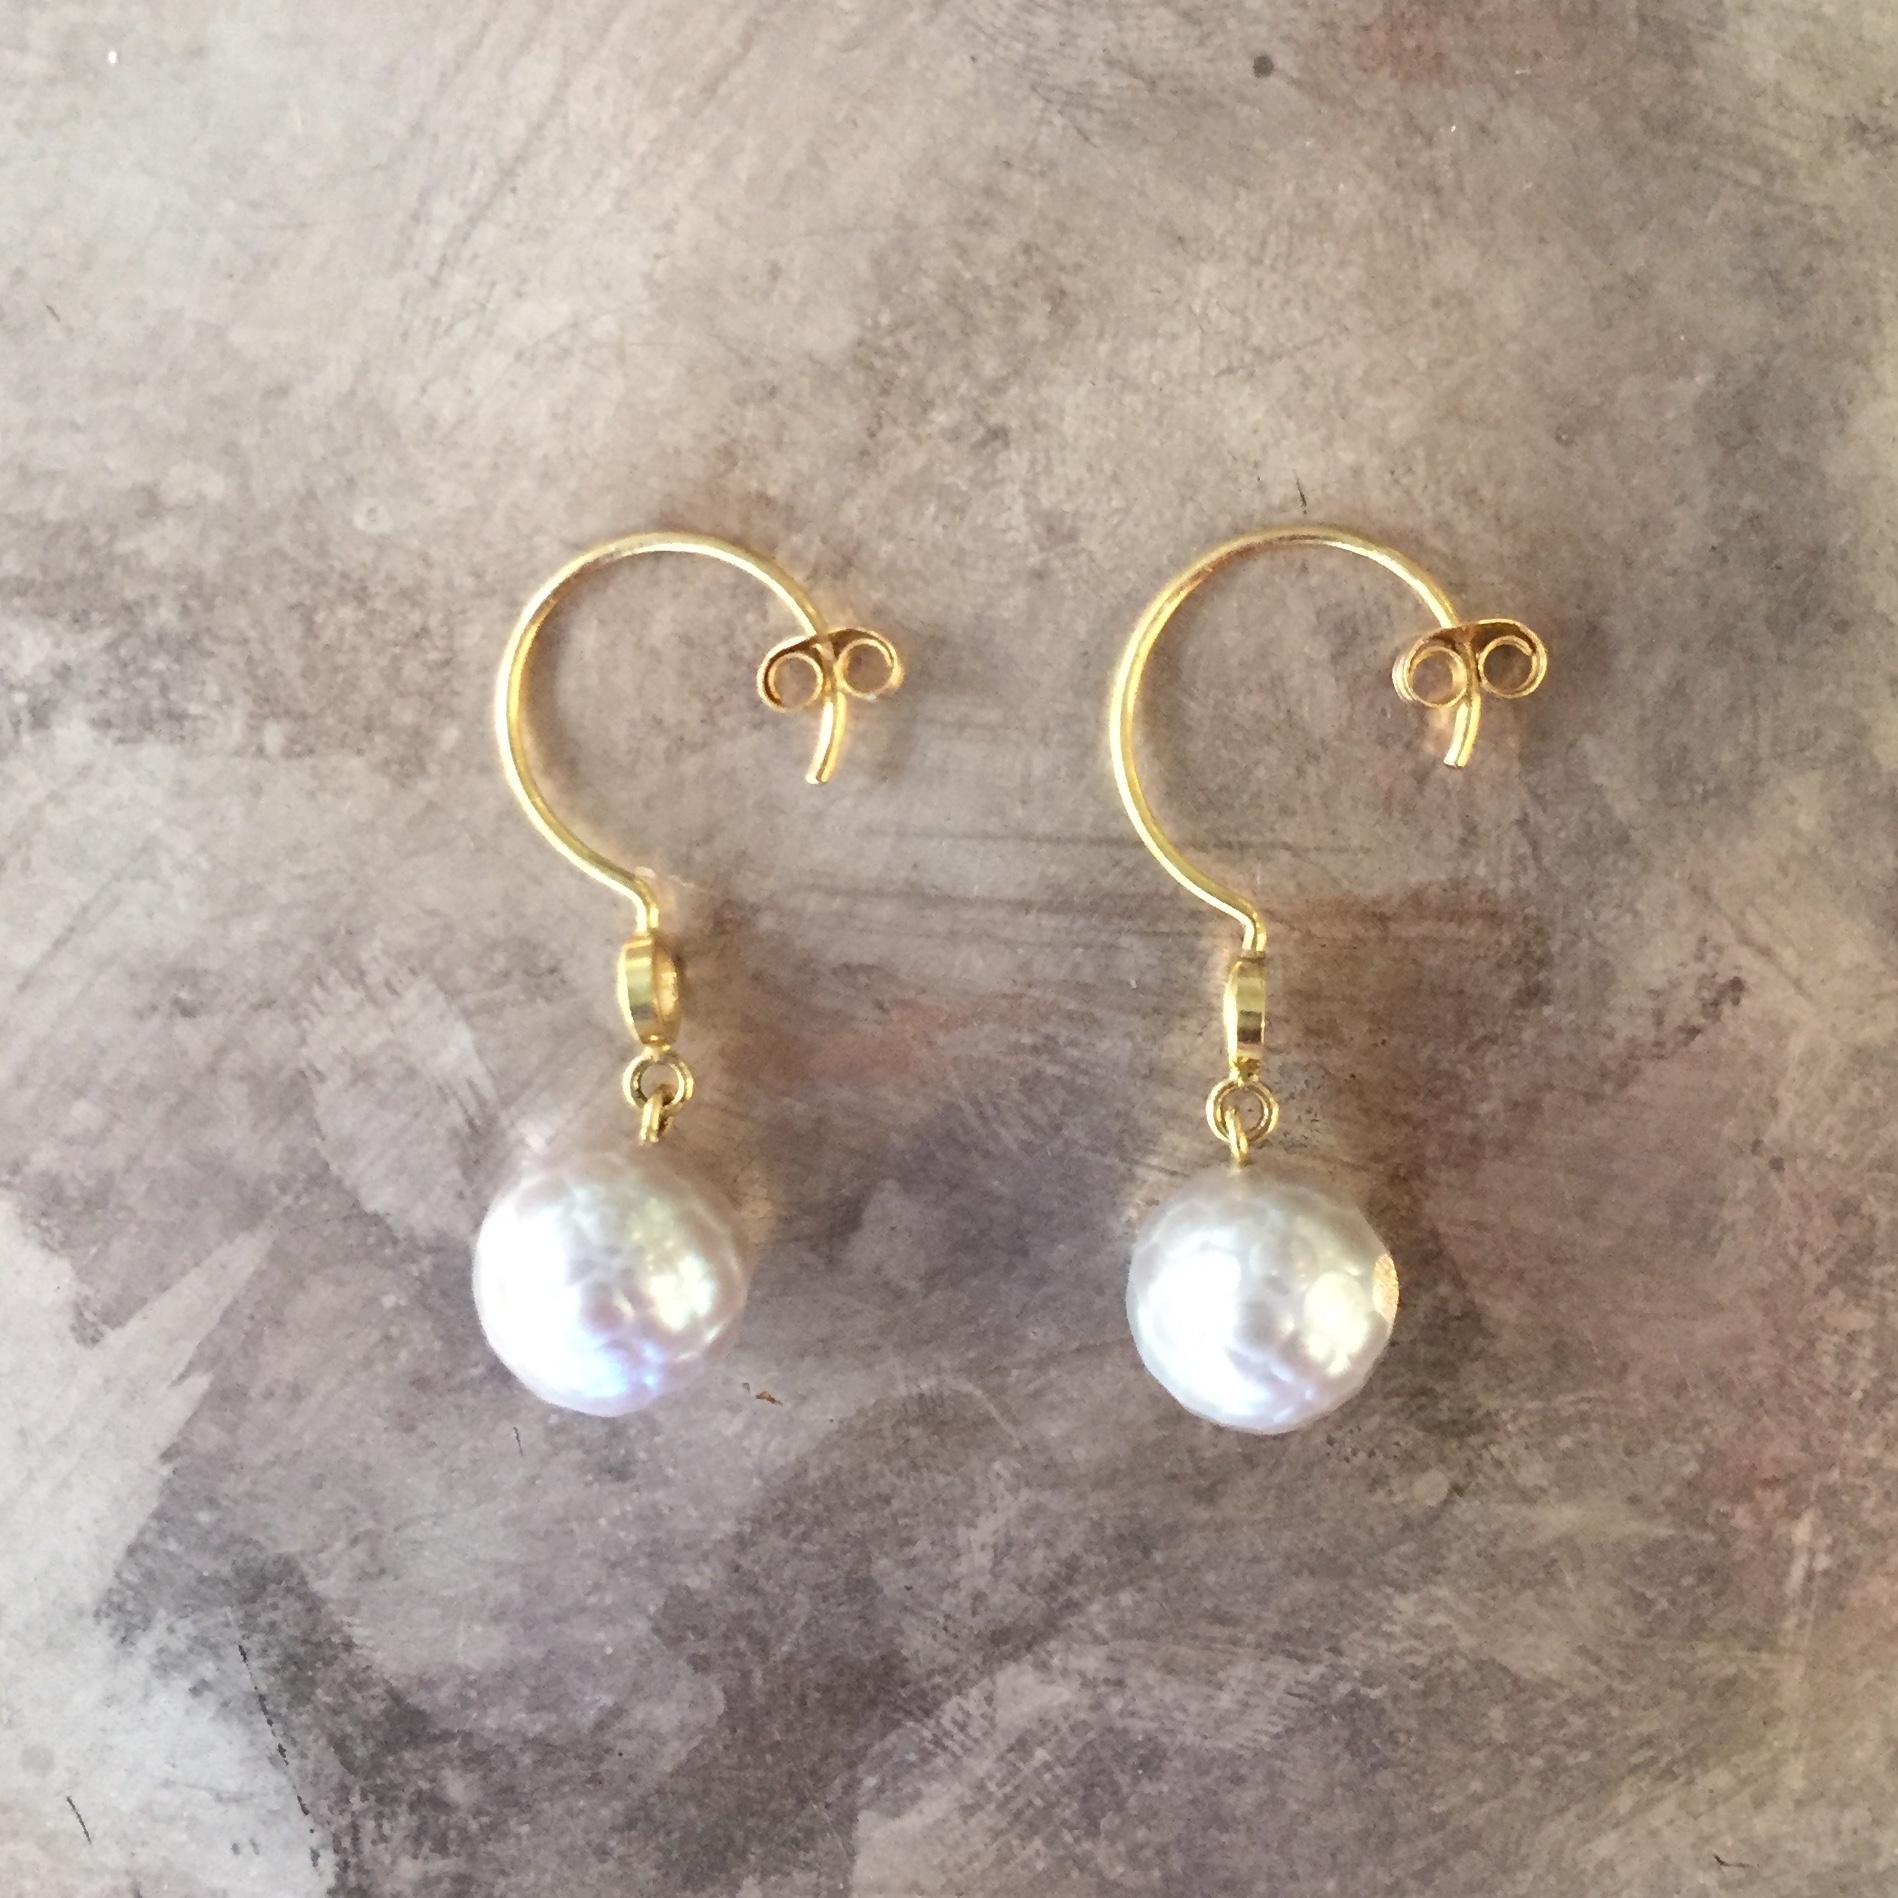 A pair of stunning small hoop earrings by Sweet Pea, made in 18k yellow gold with unique faceted grey pearls and rose cut diamonds with a total carat weight of 0.1ct. The hoops measure 10mm diameter and the pearls are 8mm. The total length of each